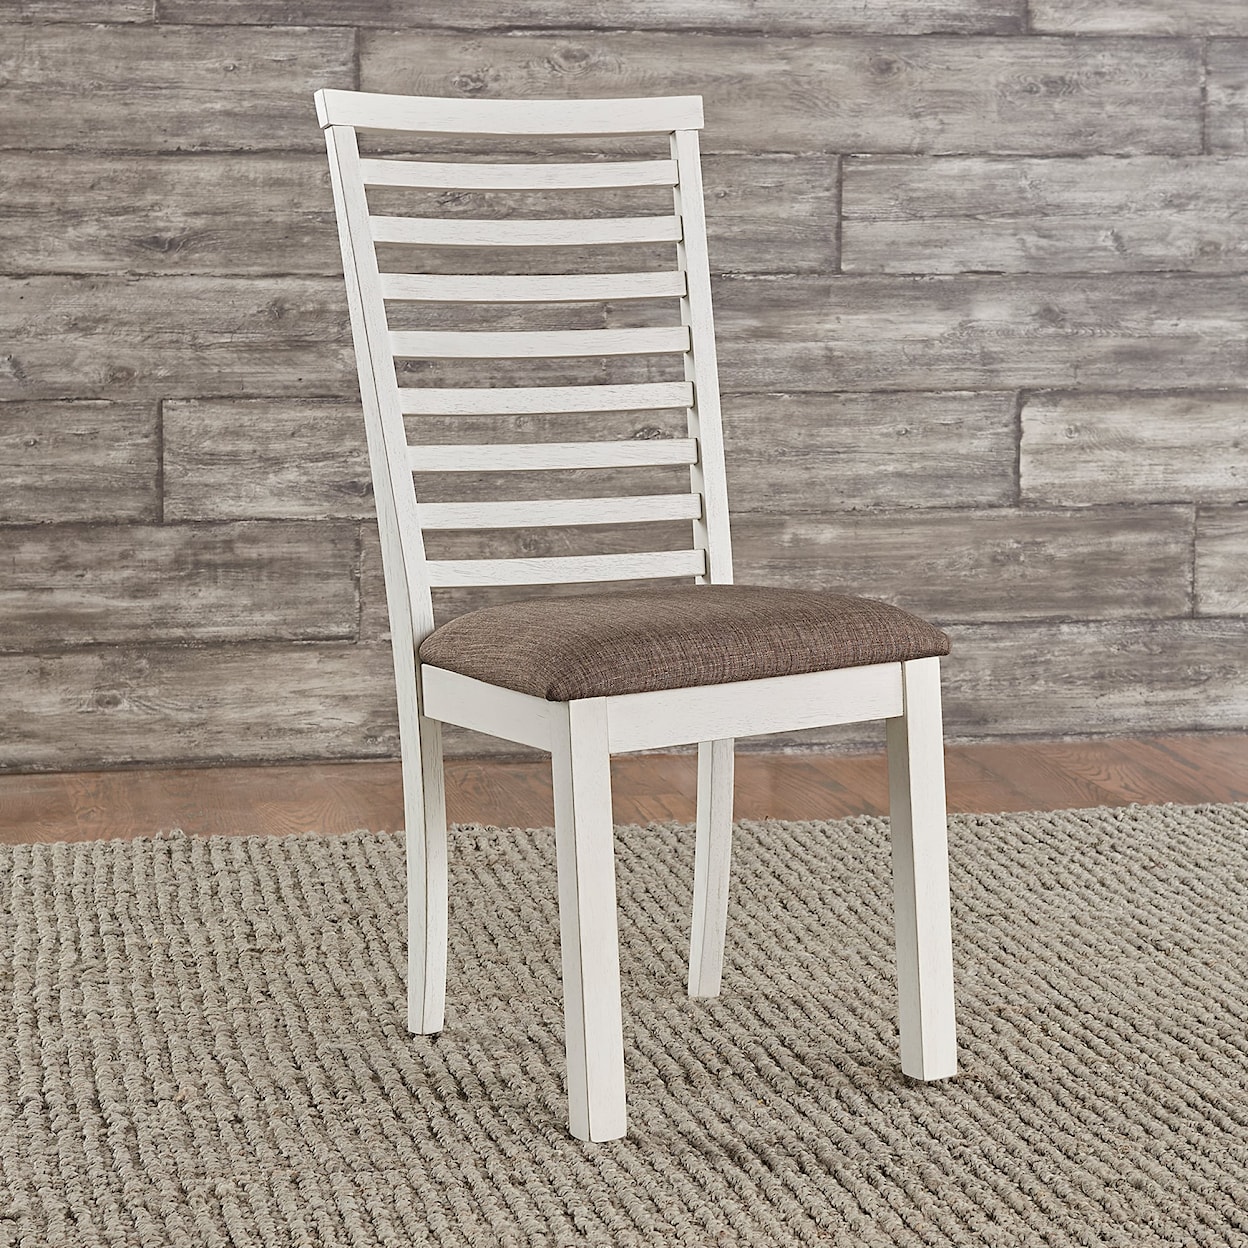 Liberty Furniture Brook Bay Uph Ladder Back Side Chair